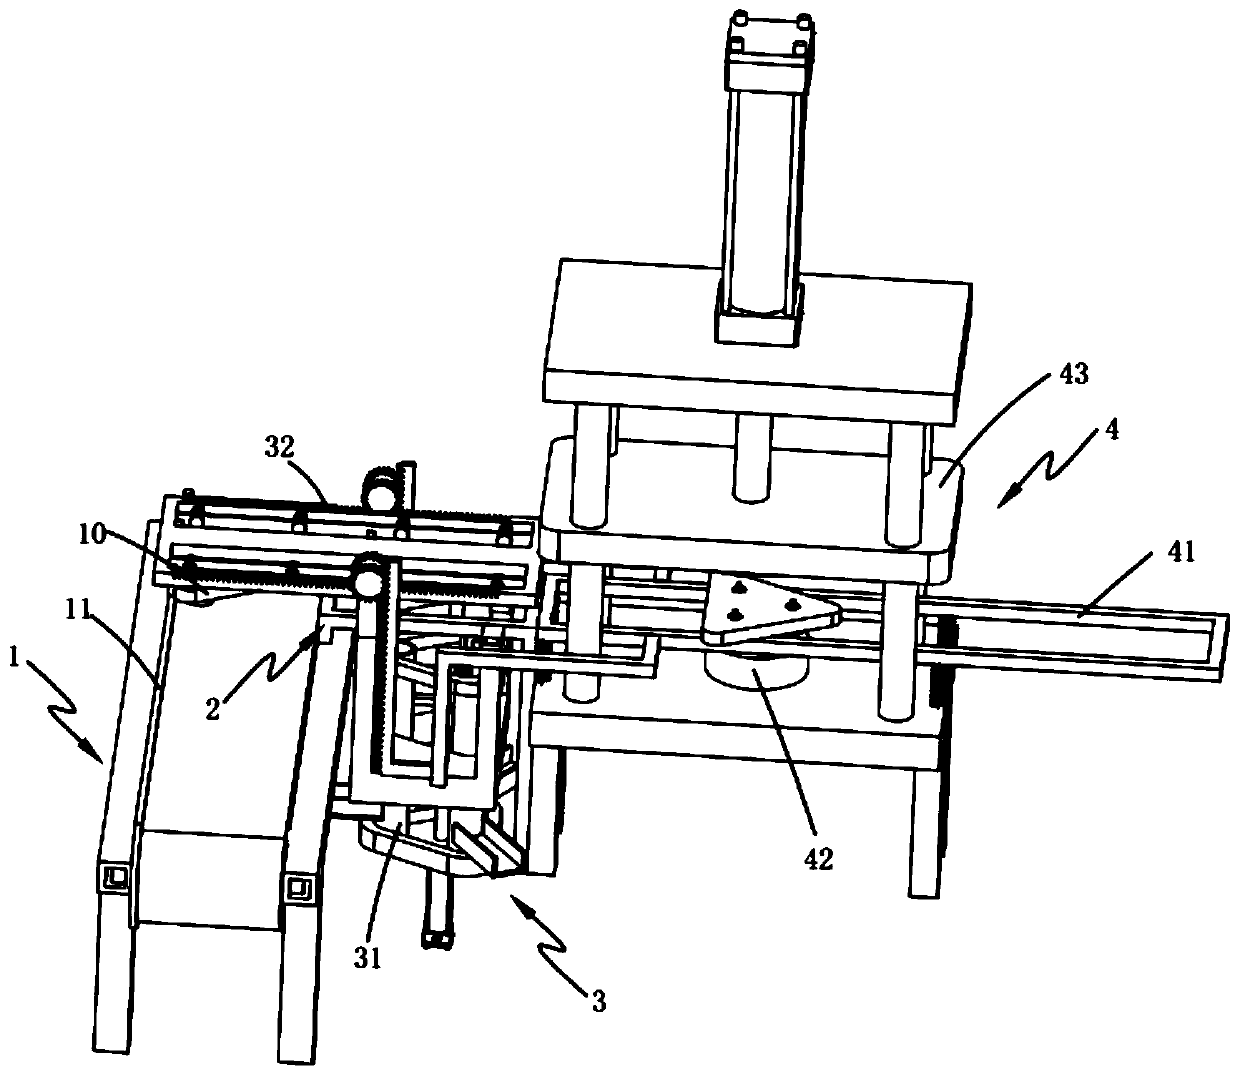 A semi-automatic continuous assembly machine for electromagnetic clutch